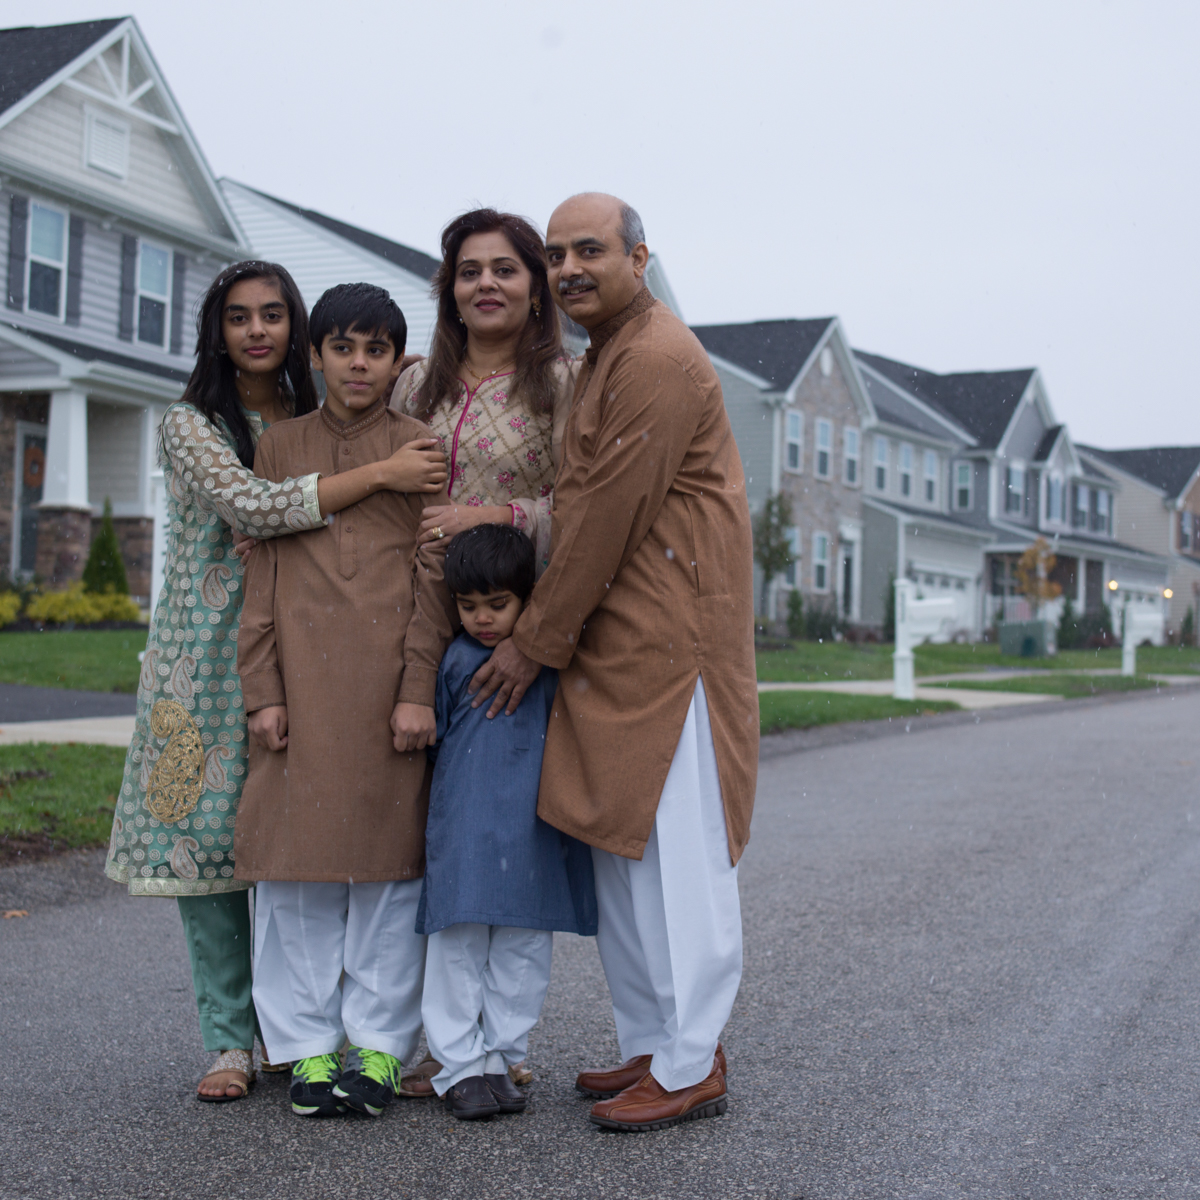  Mirza family from Pakistan: Naeem Mirza, fifty-one; Raqna Mirza, forty-two; Laiba Mirza, fourteen; Mohid Mirza, twelve; Muhab Mirza, four.     Naeem Mirza has been in the U.S. for eighteen years. His first visit was in 1999. His company transferred 